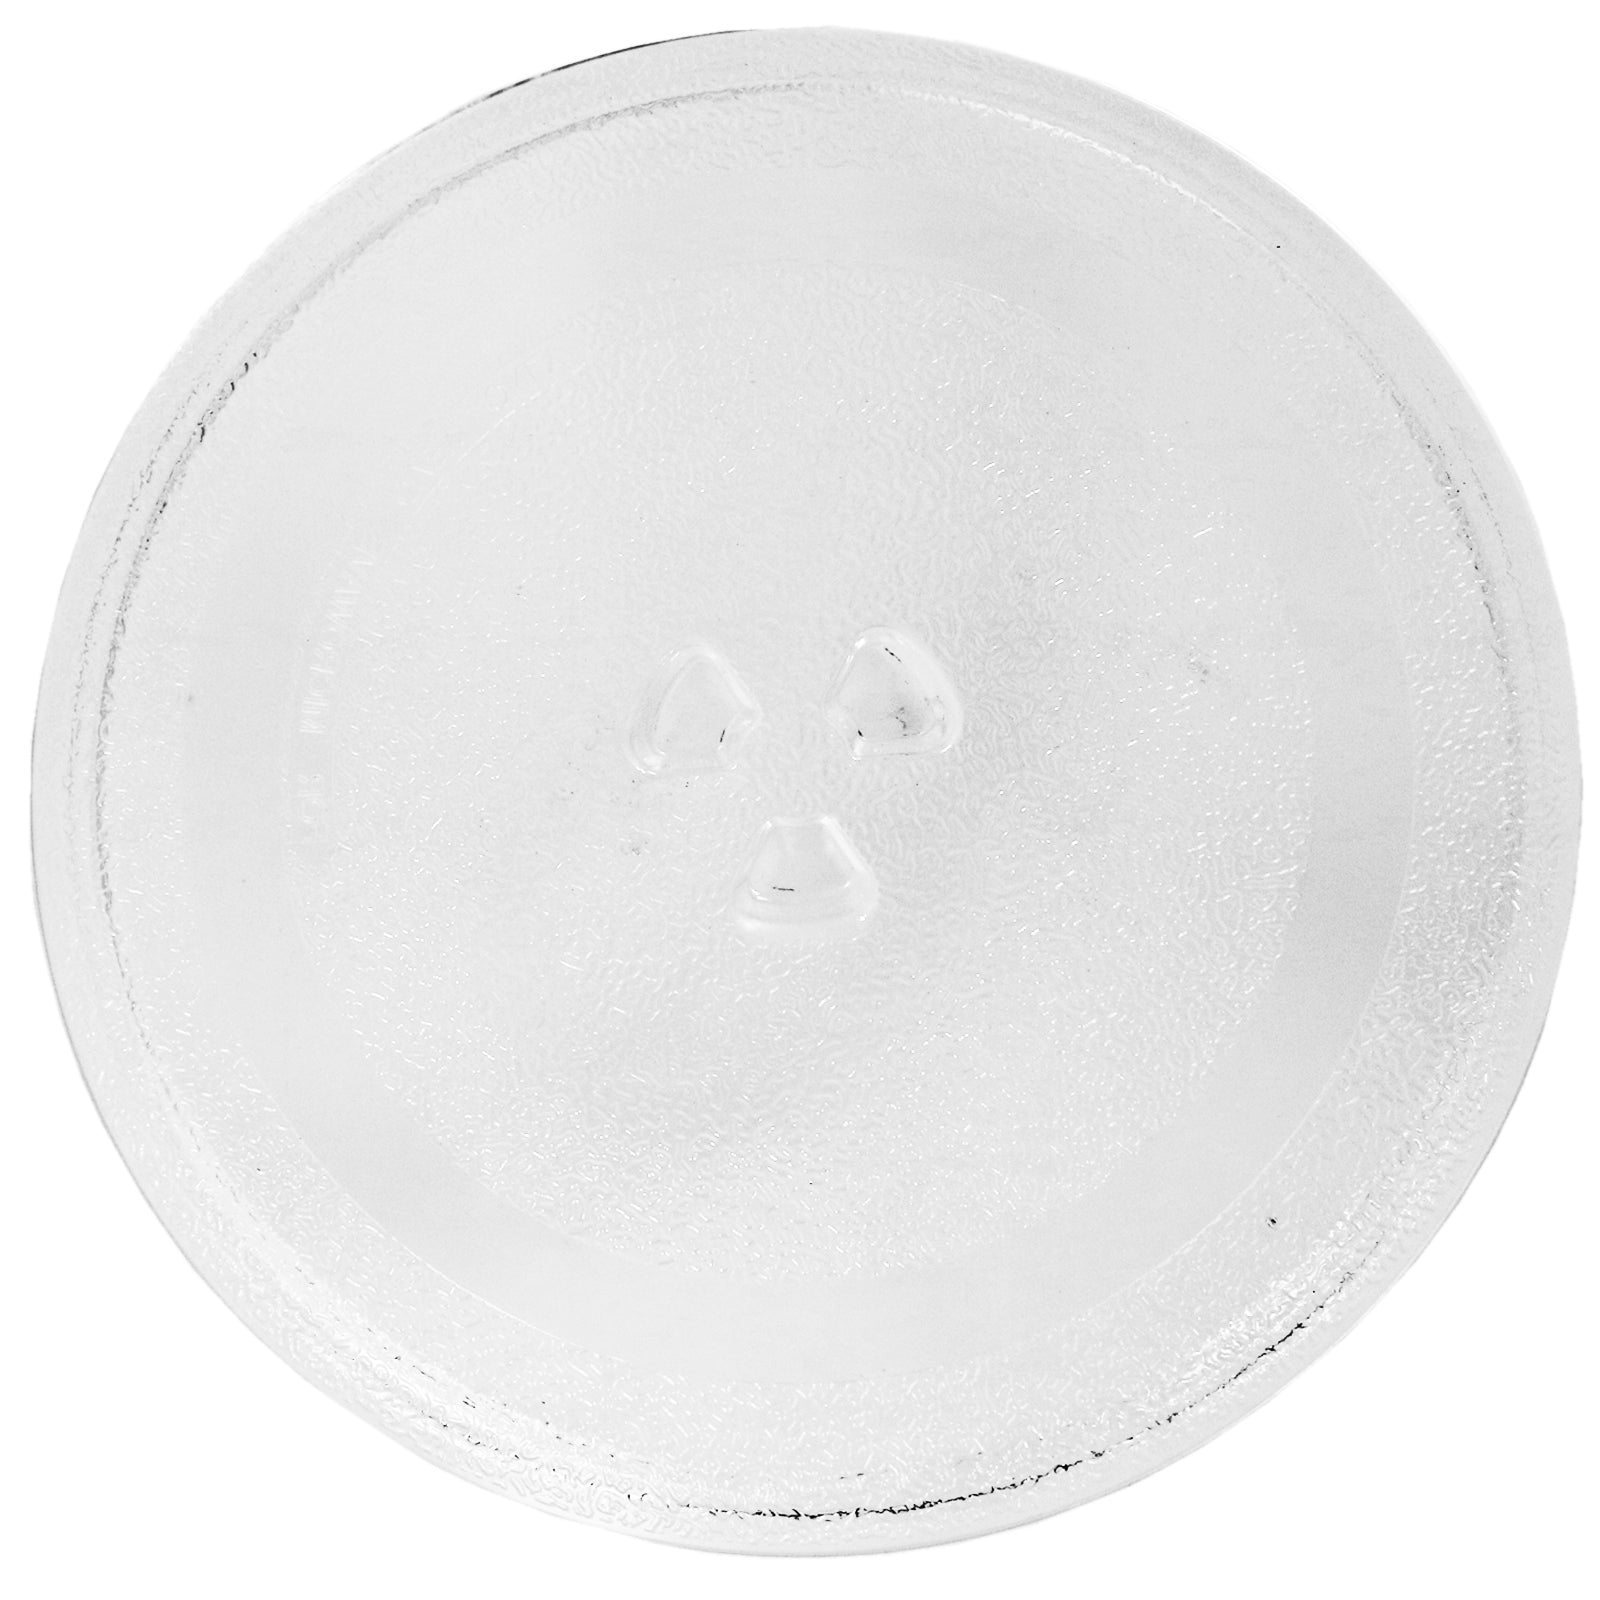 Glass Turntable Plate for BREVILLE Microwave Oven (245mm)